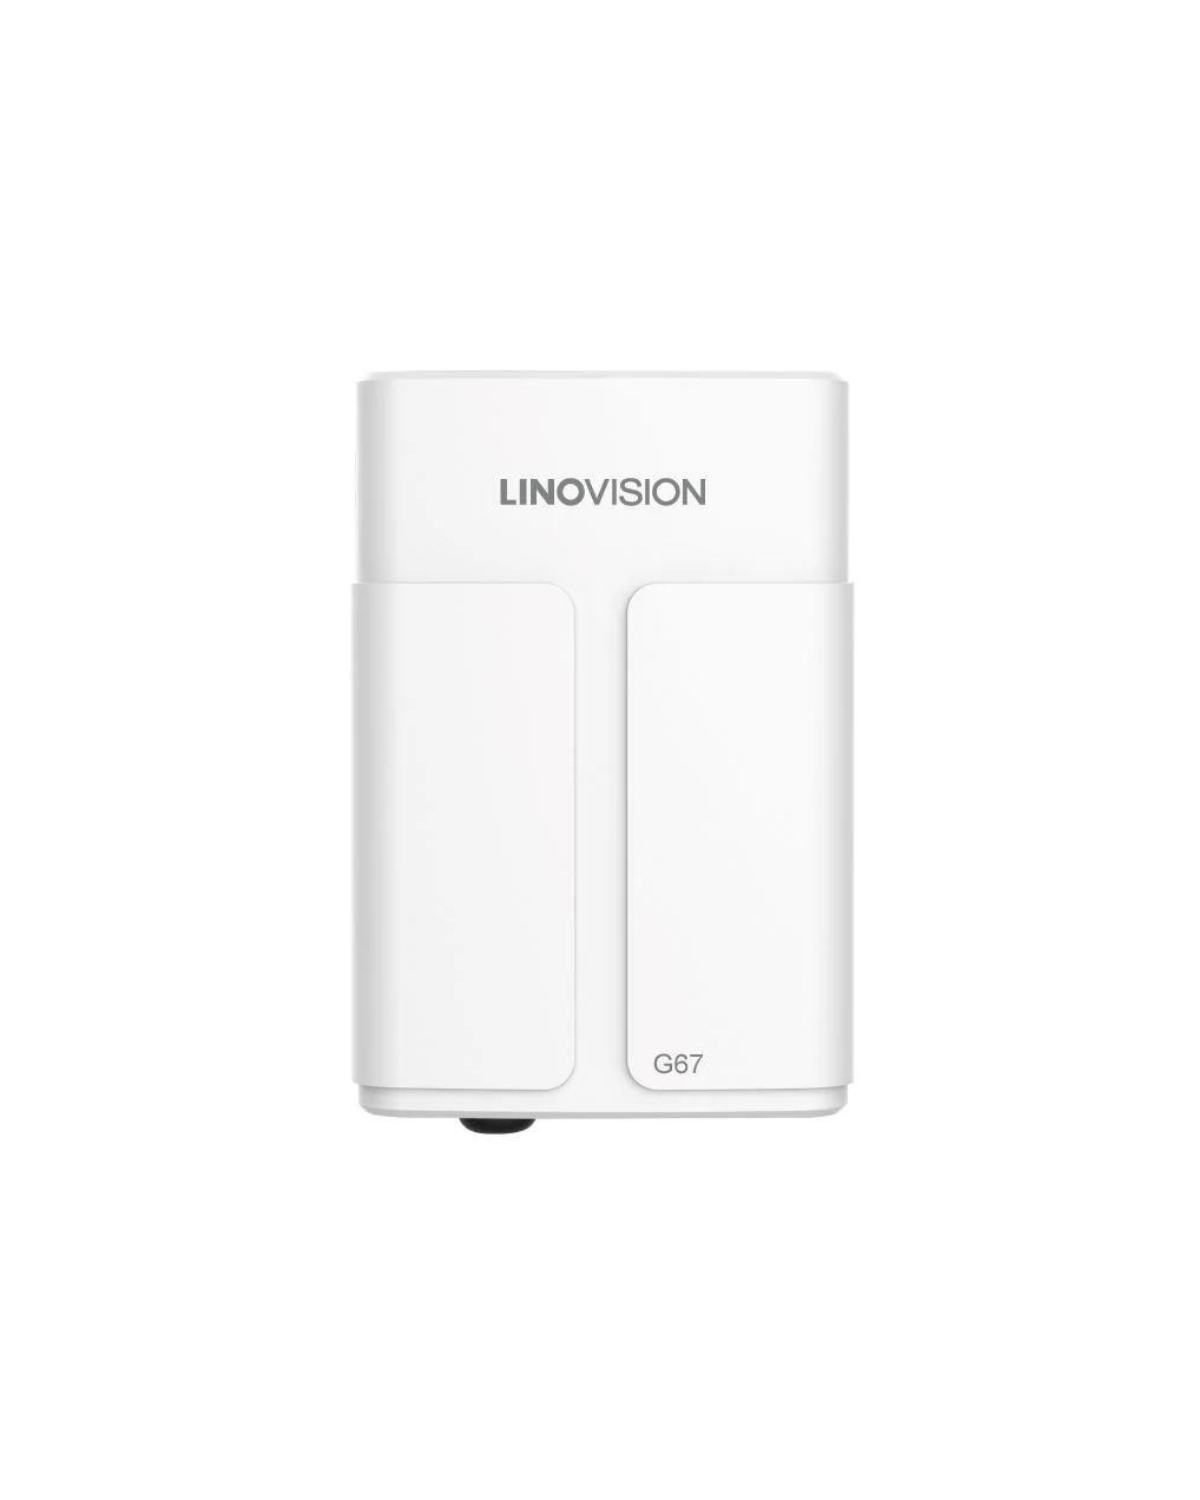 Outdoor LoRaWAN Gateway with built-in WEB and Compatible to multiple Cloud Platforms